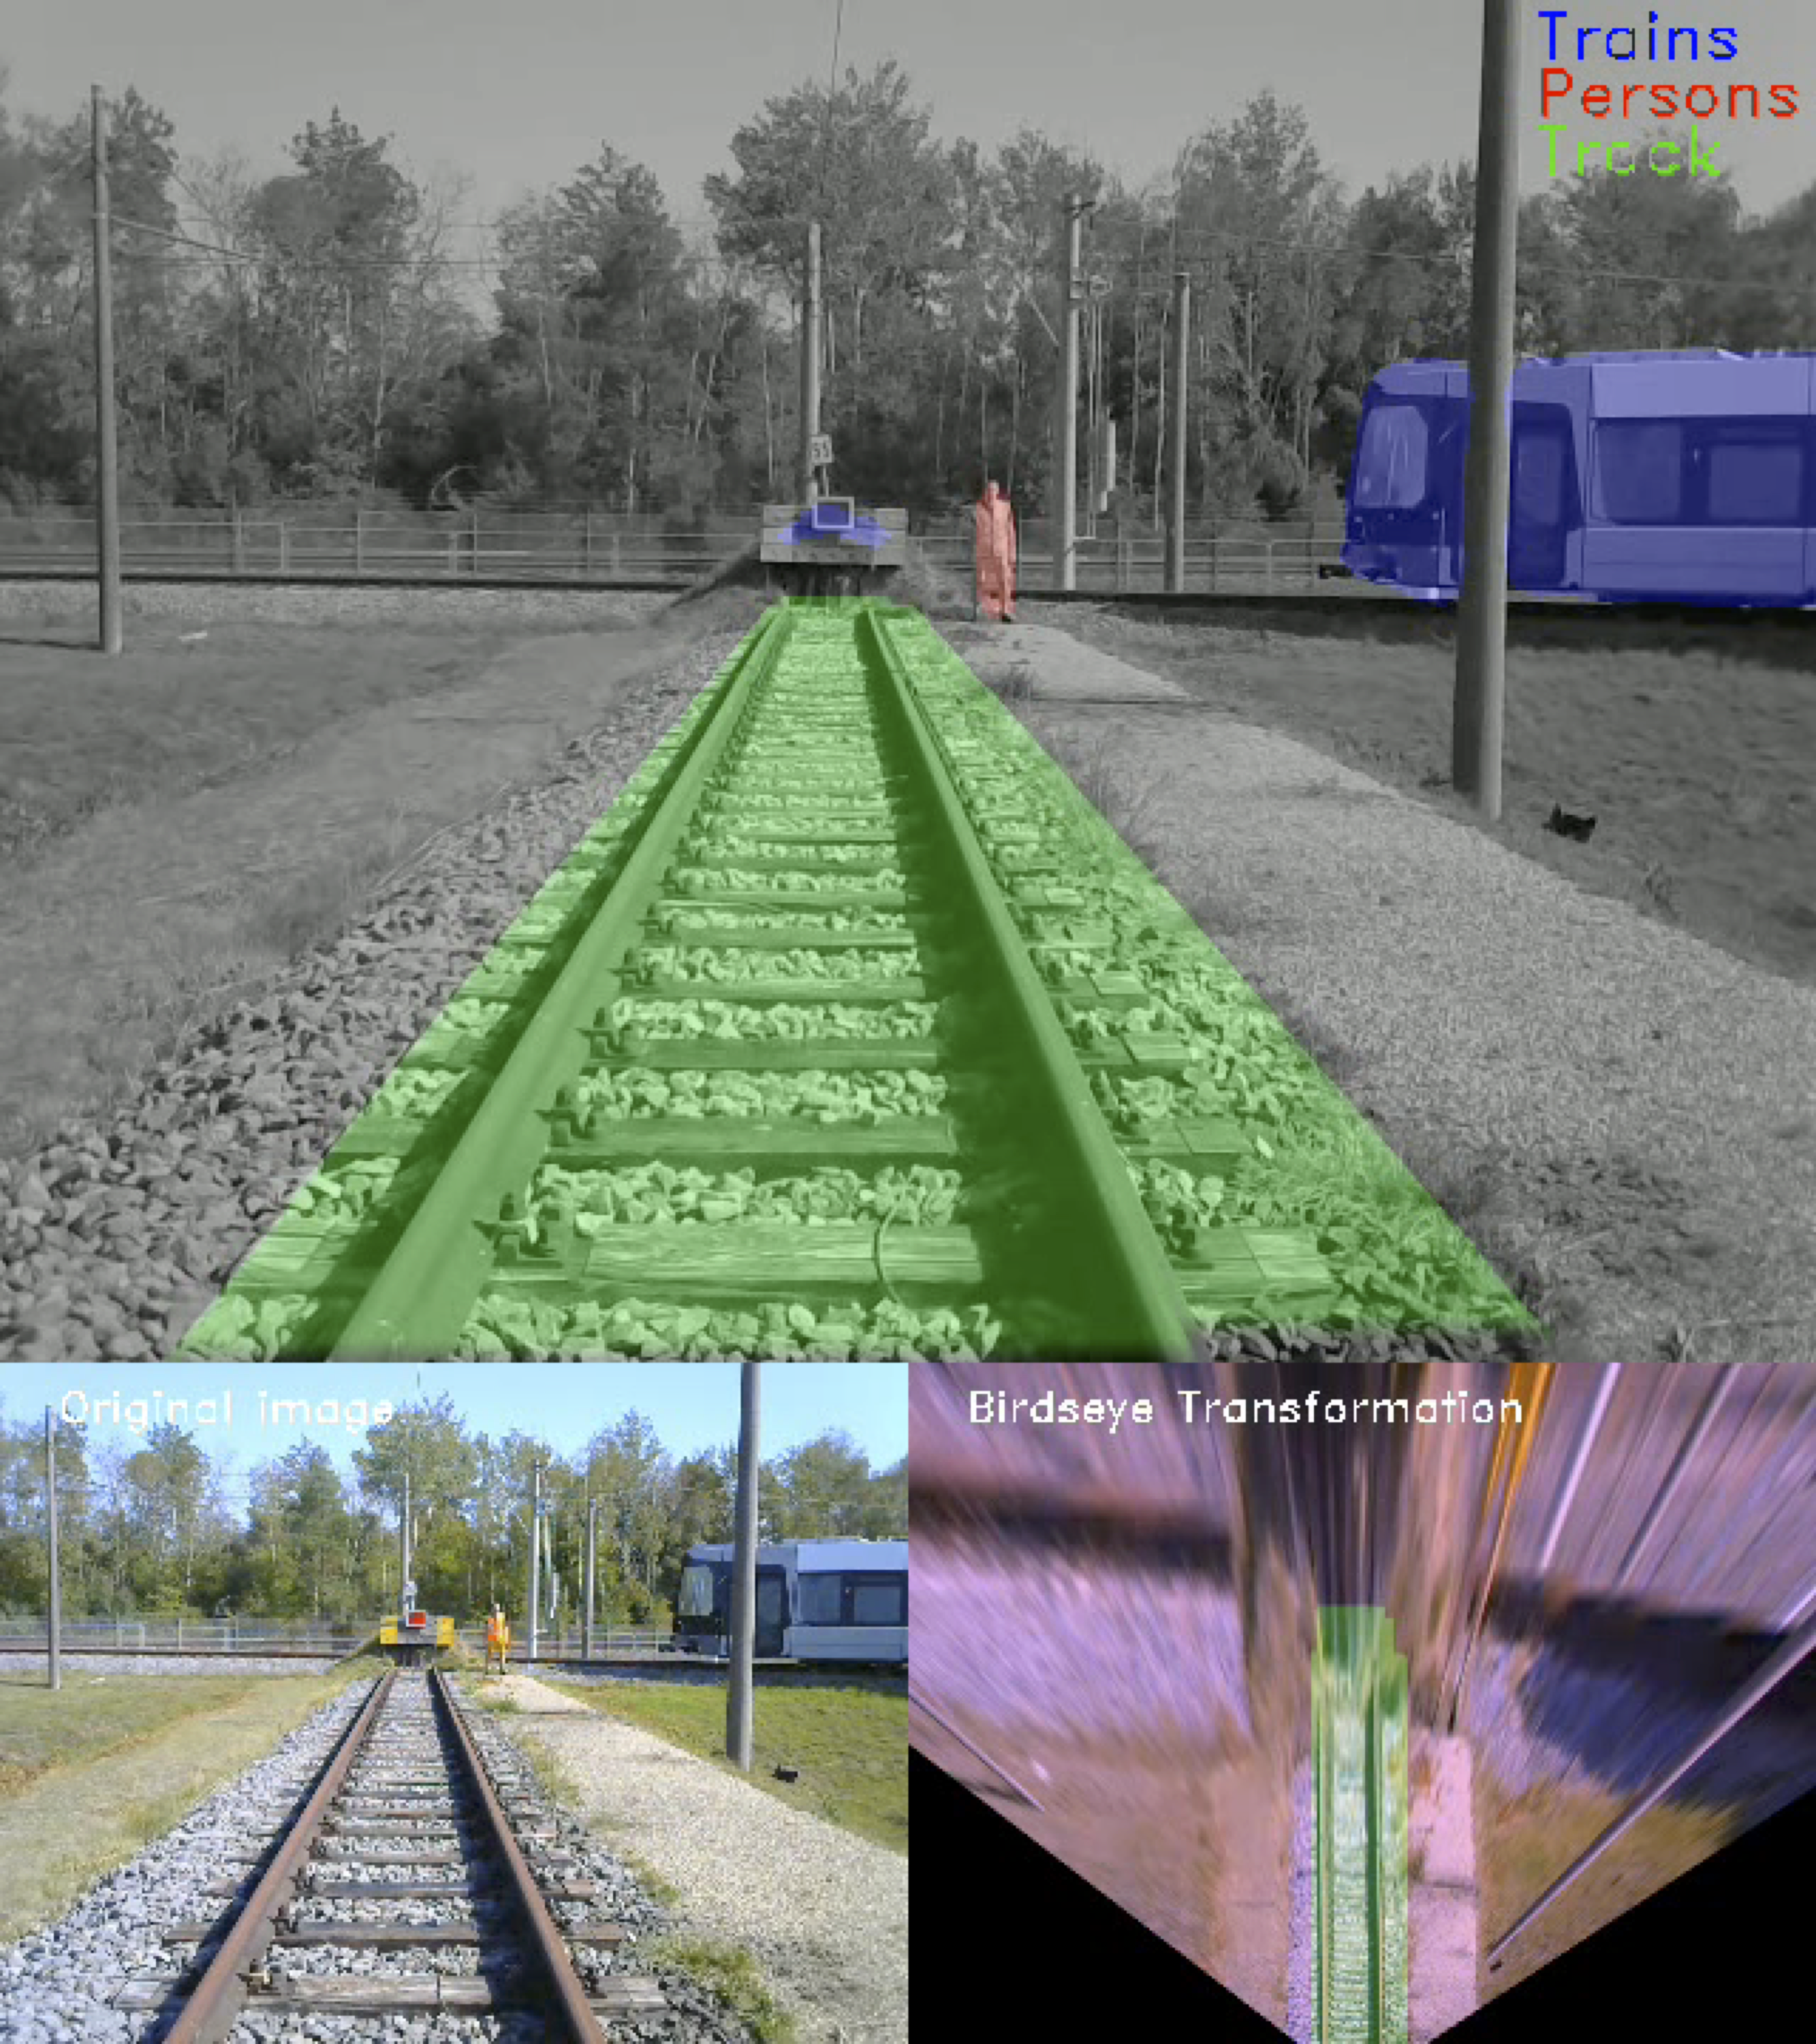 Example AI for track and object detection